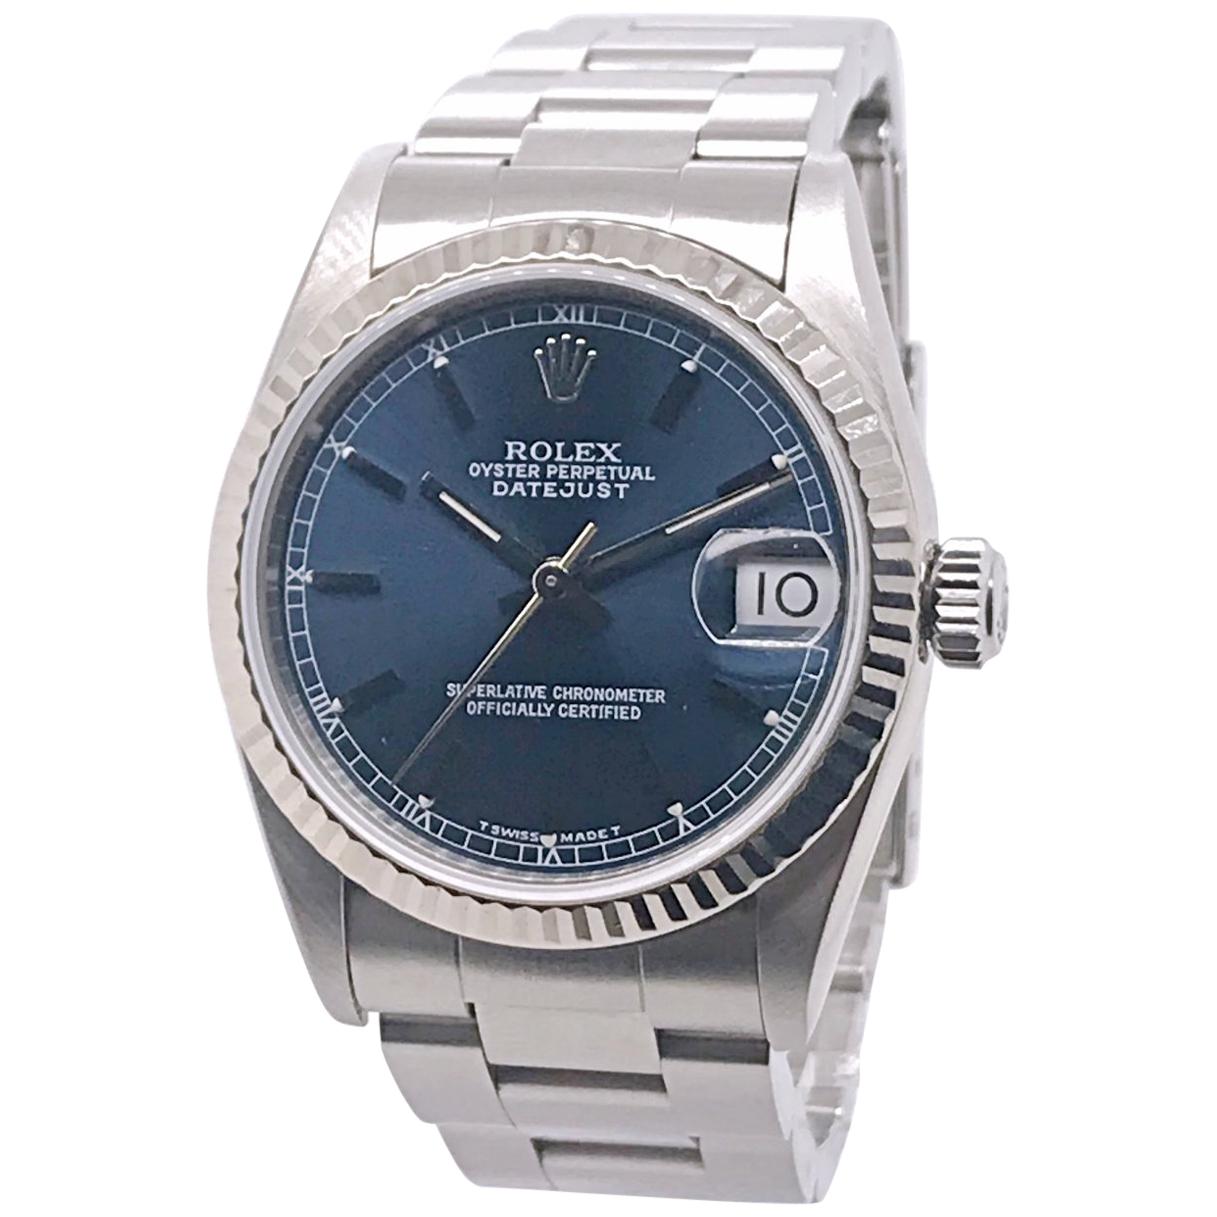 31mm Rolex Datejust with Blue Dial, circa 1998